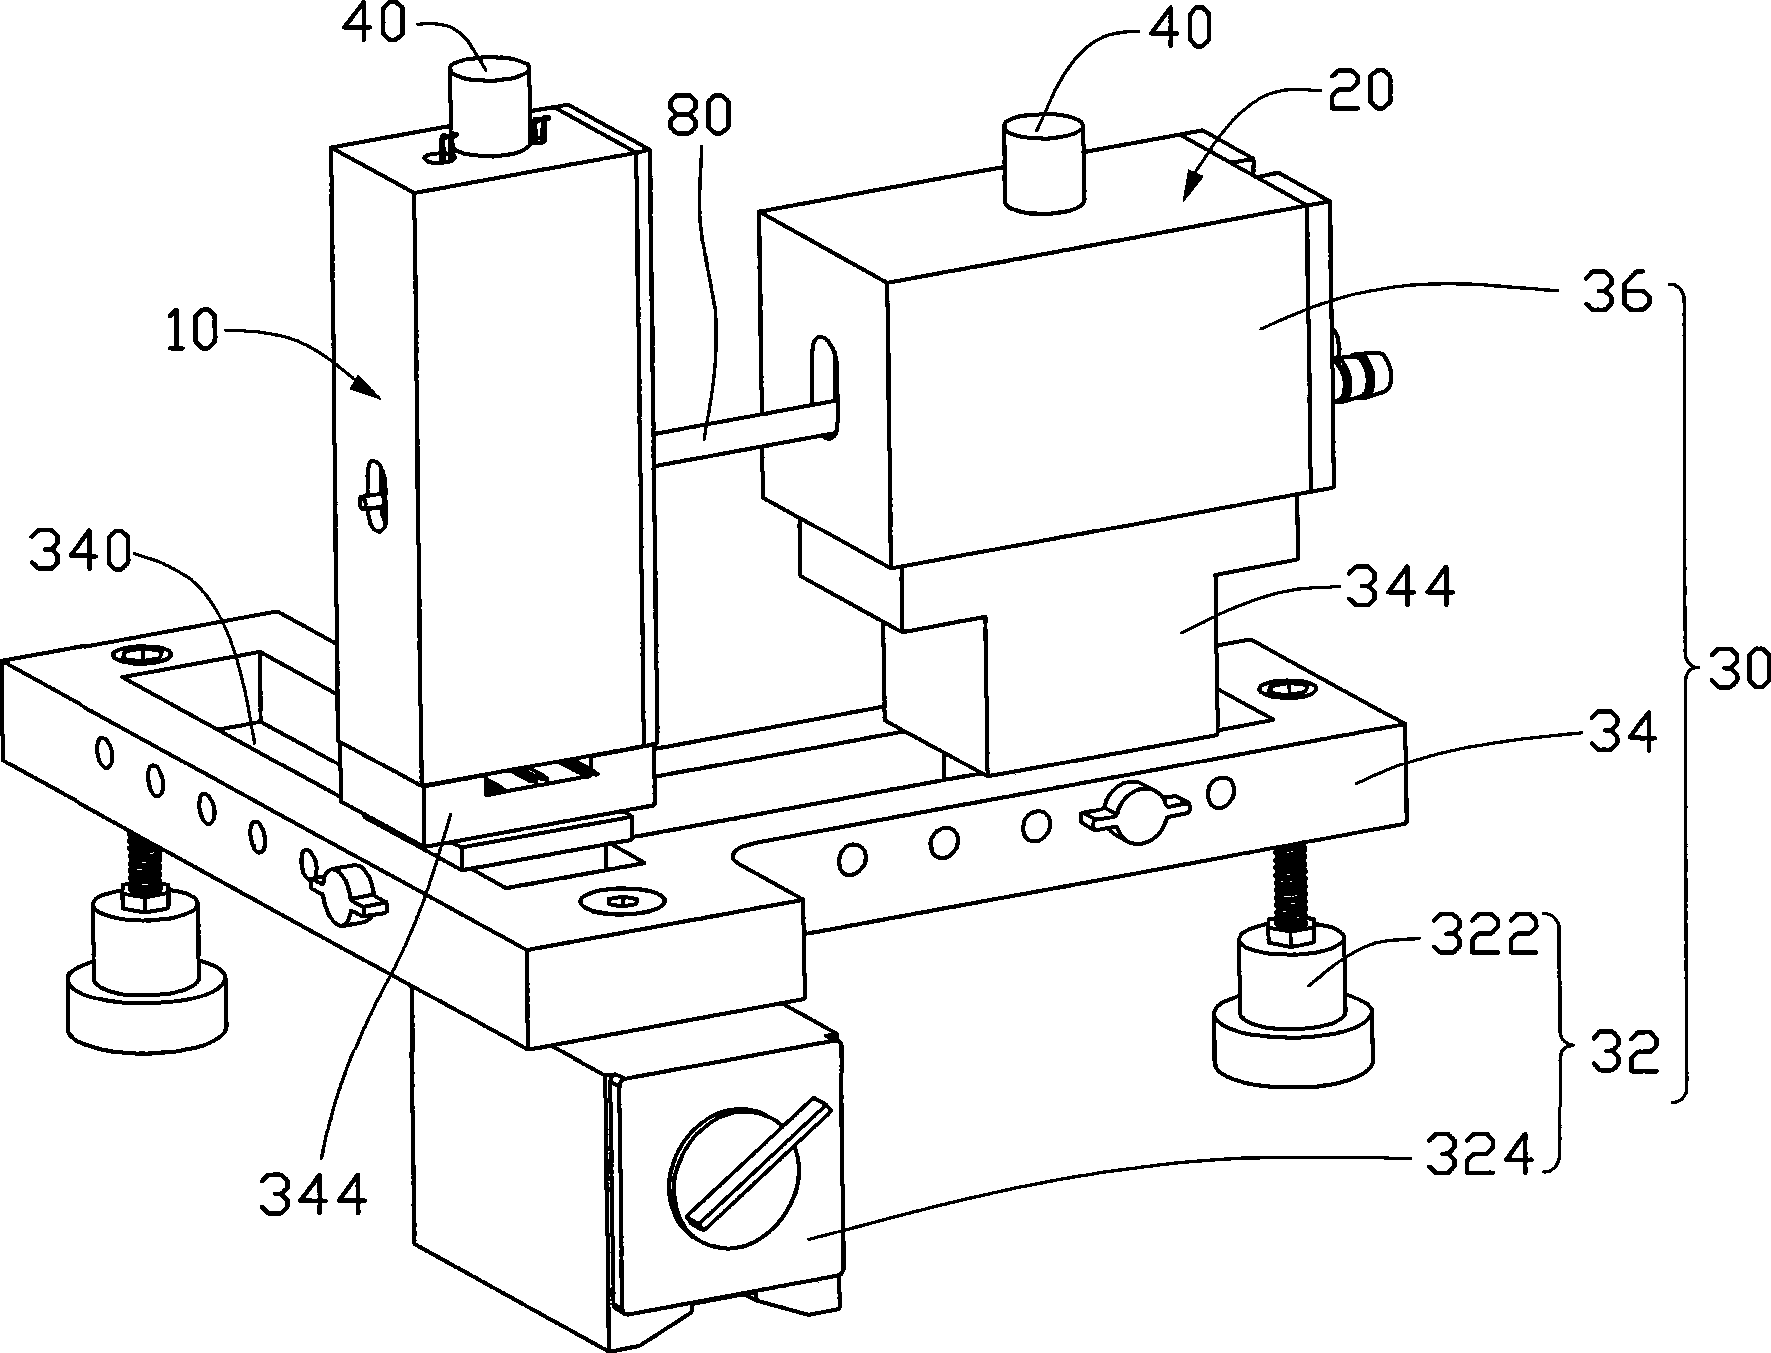 Hot pipe performance detecting device